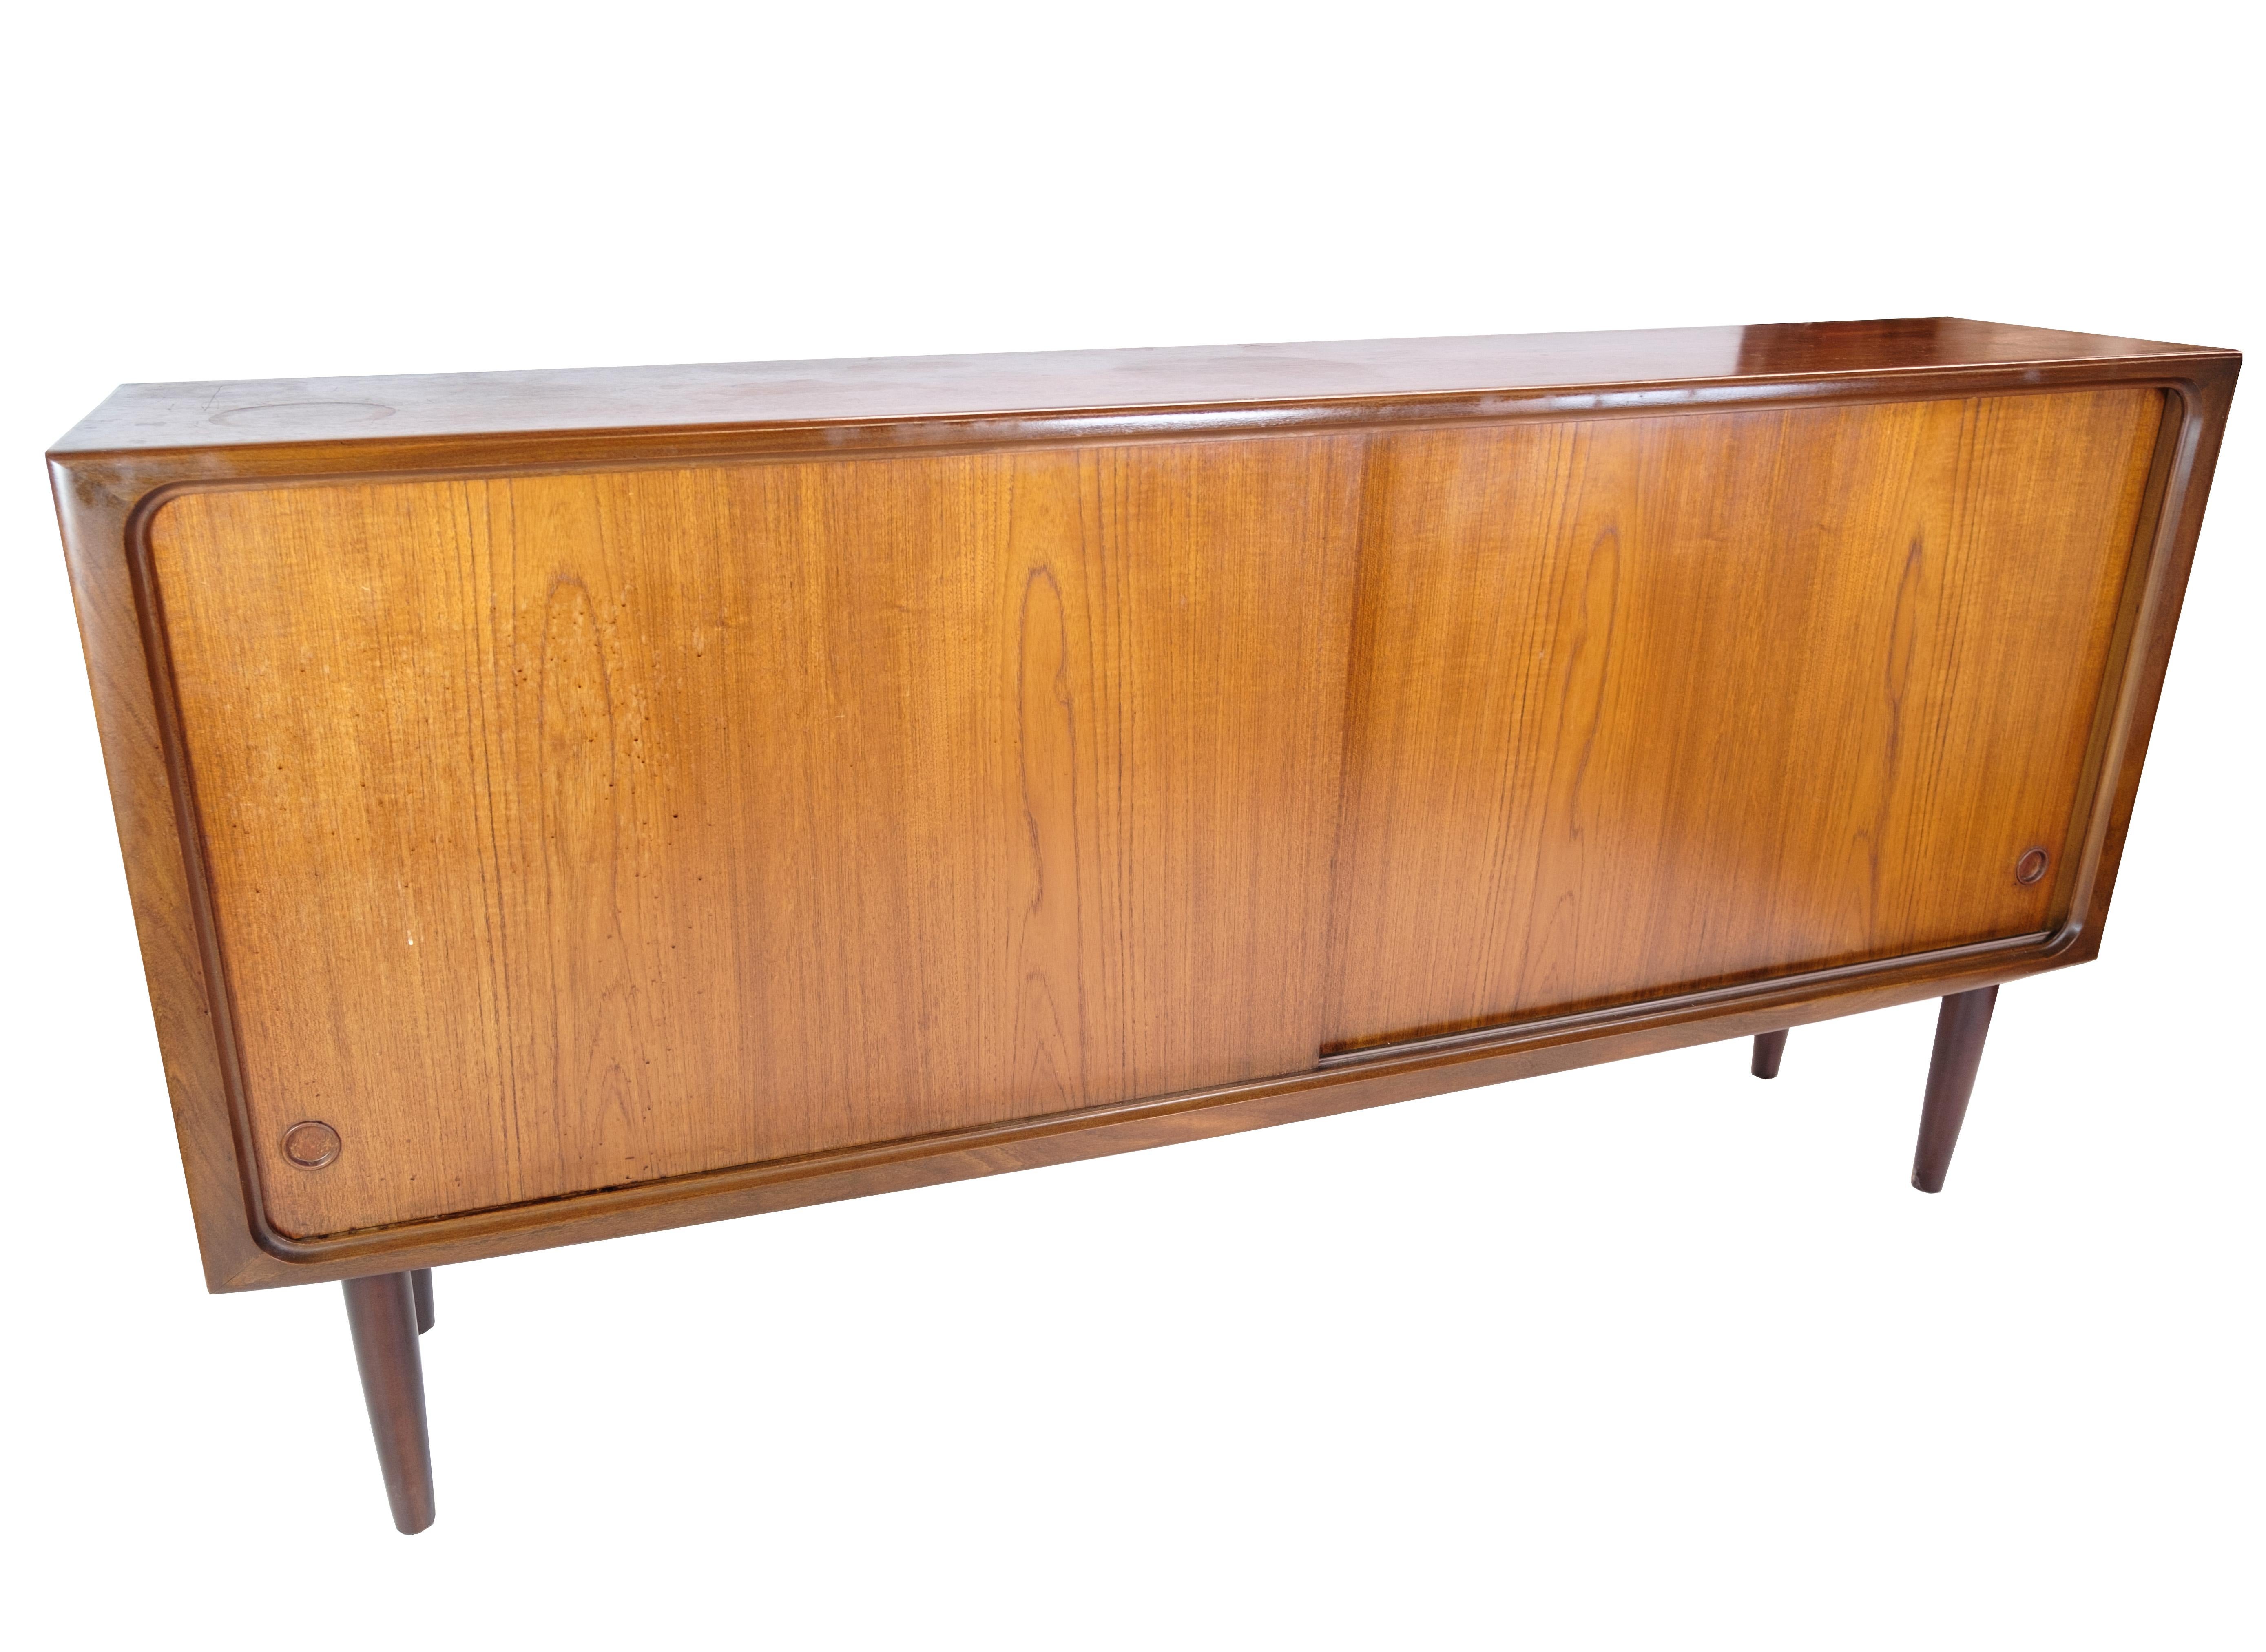 Mid-Century Modern Sideboard Made In Teak, Danish Design From 1960s For Sale